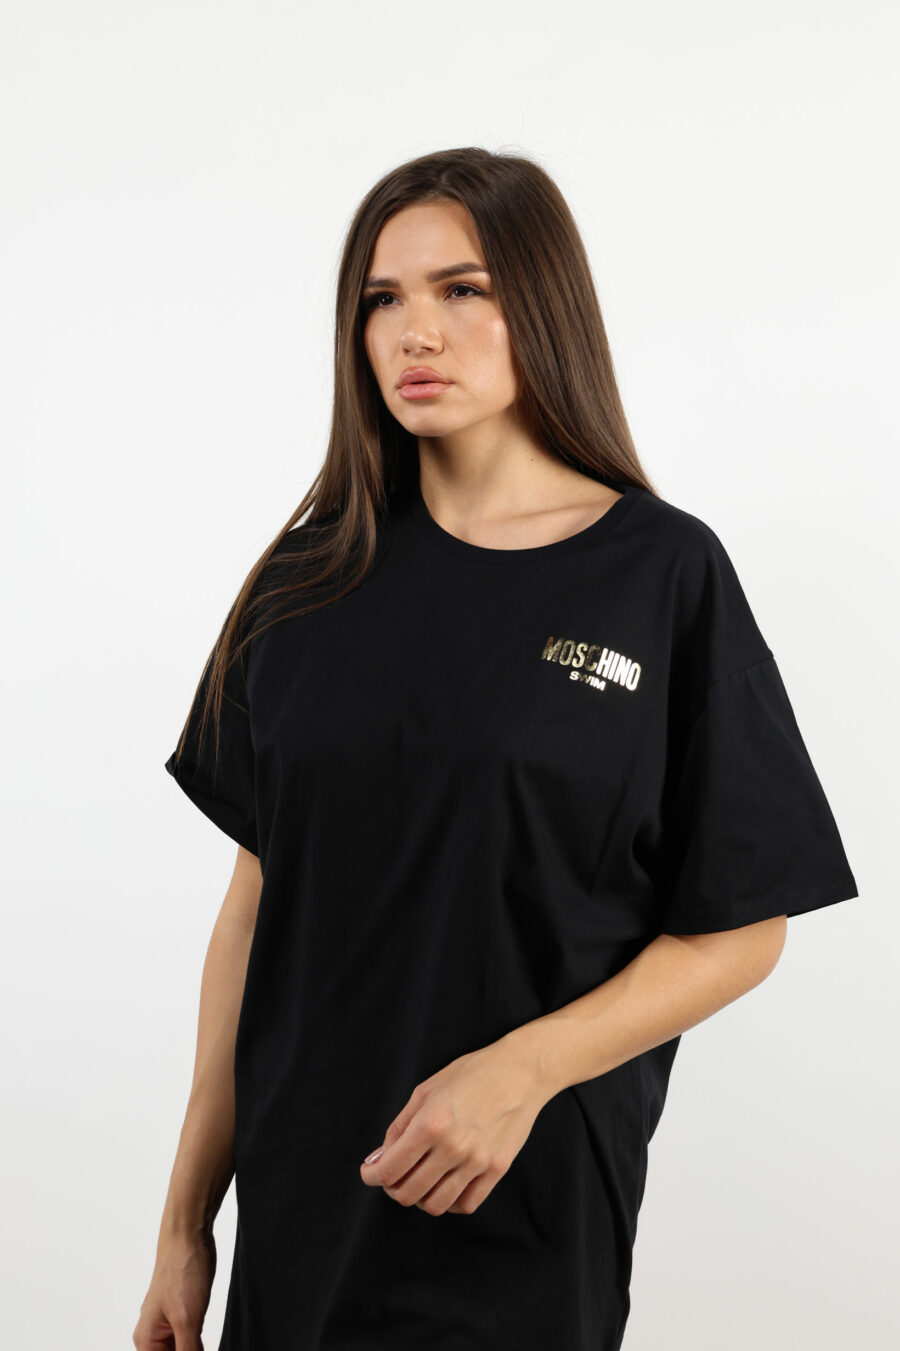 Black dress with gold lettering logo - 109520